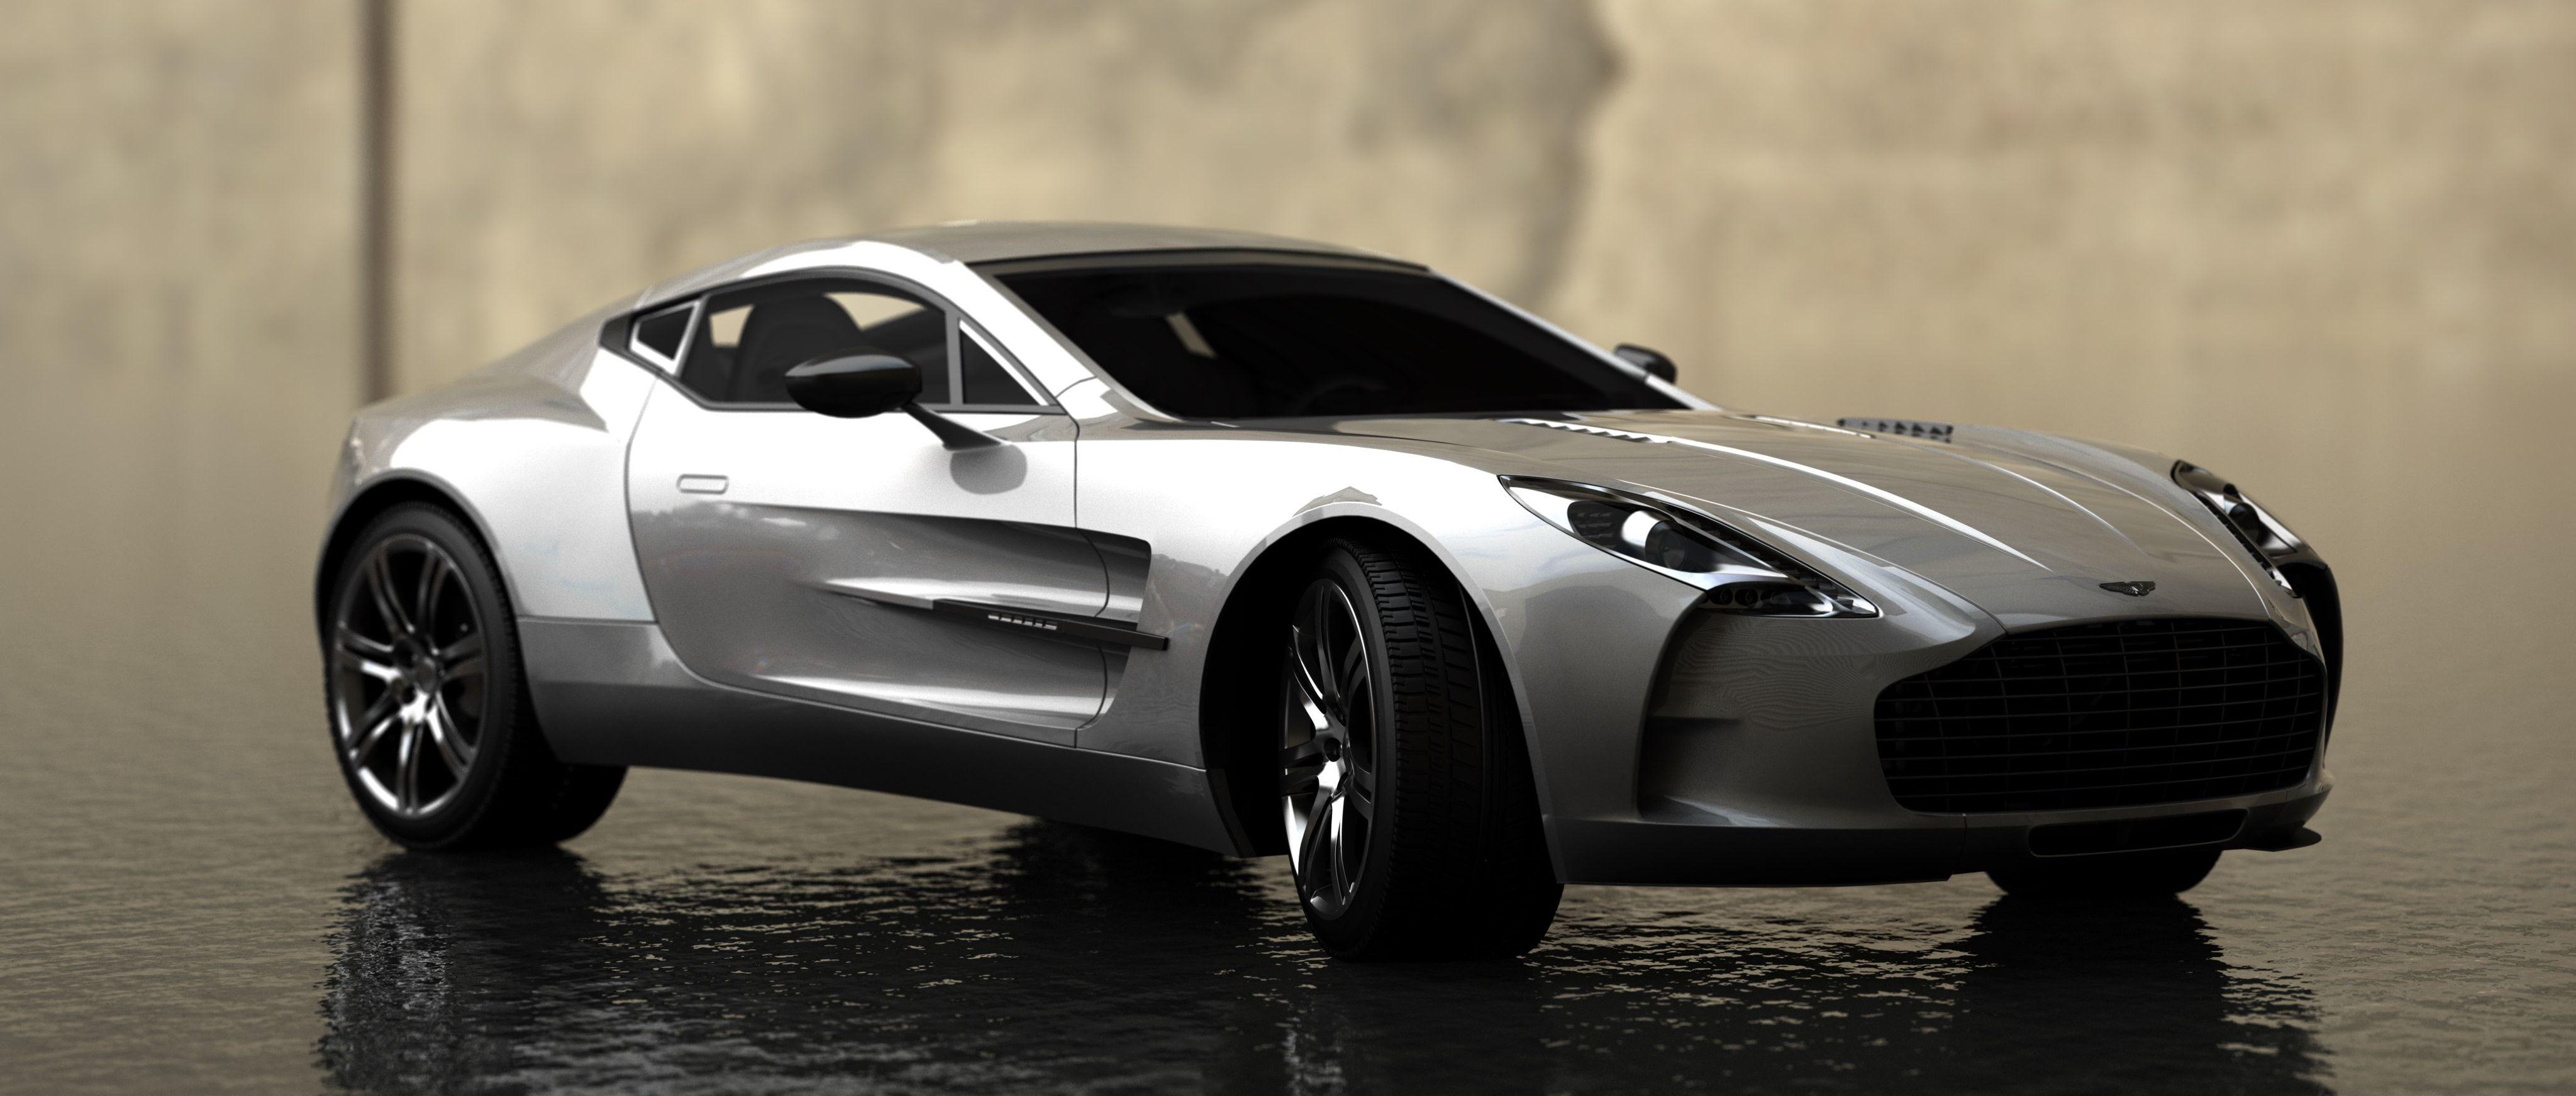 Aston Martin One 77 Wallpapers Top Free Aston Martin One 77 Backgrounds Wallpaperaccess